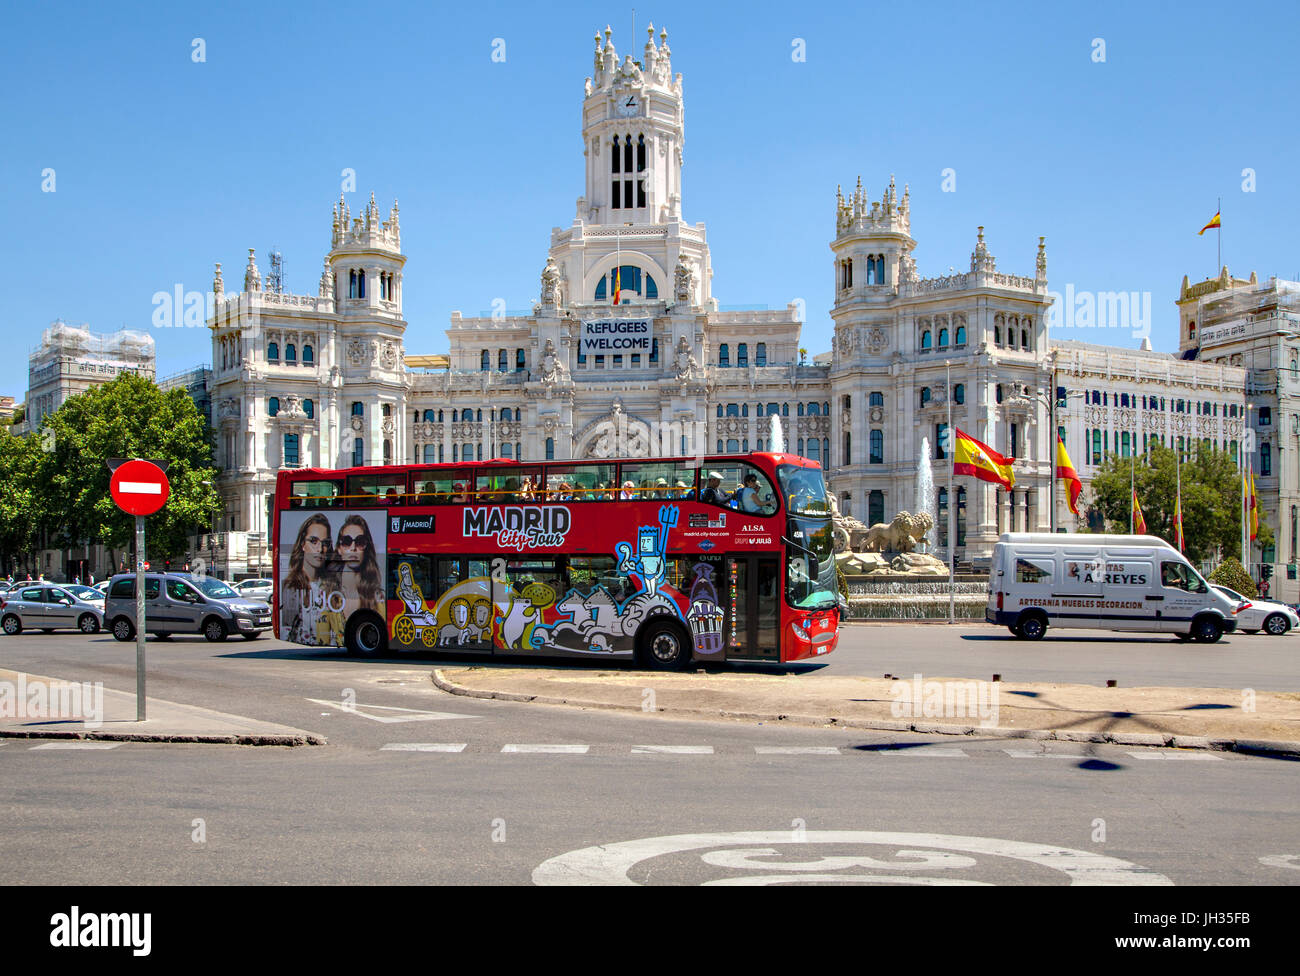 Madrid sightseeing bus driving around the Plaza de Cibeles and passing the Cybele Palace / city hall with a sign saying refugees welcome Stock Photo